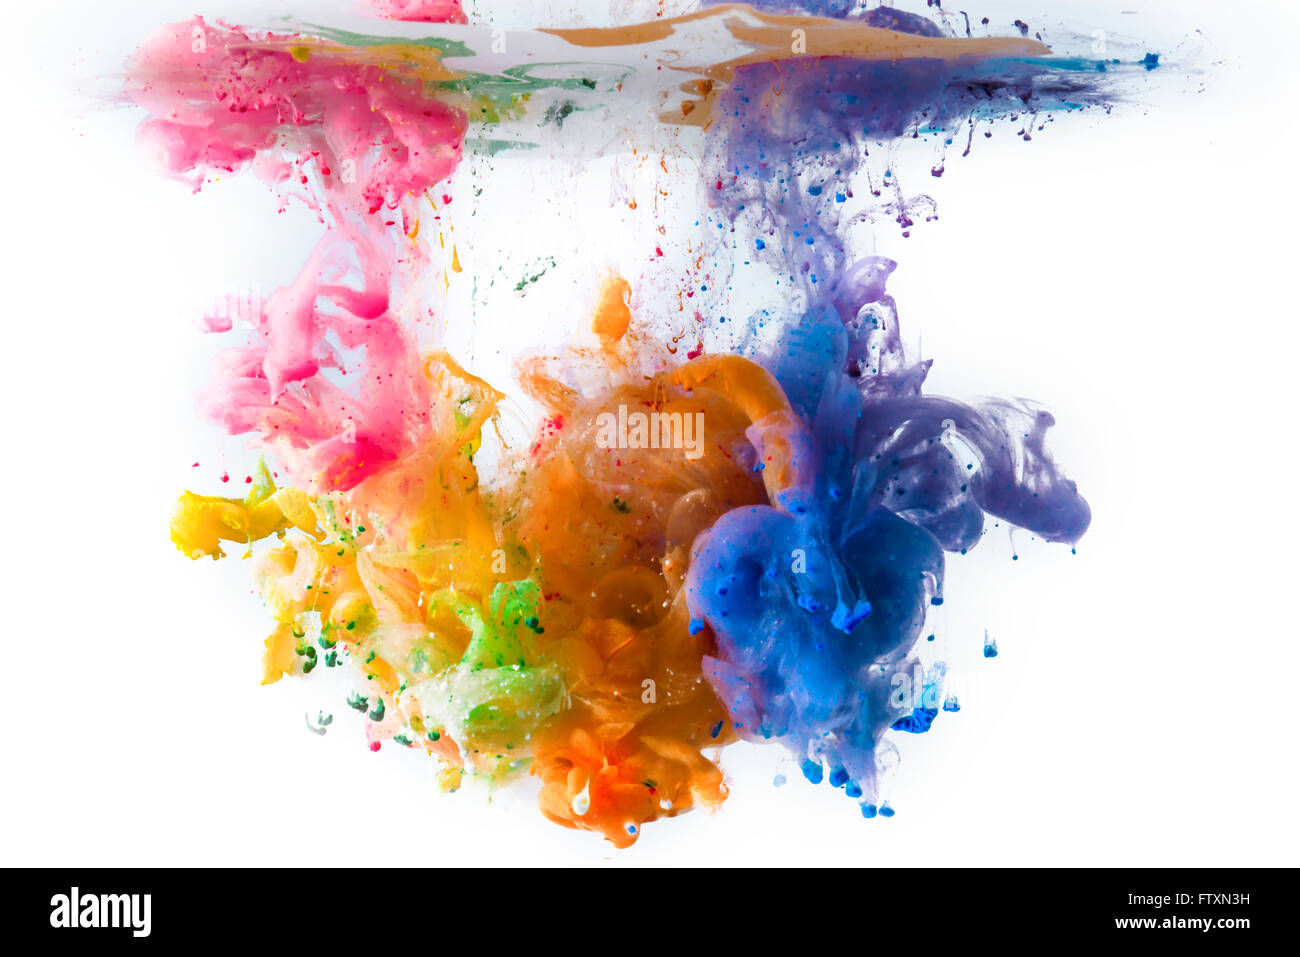 Multi-colored acrylic paints dissolving in water Stock Photo